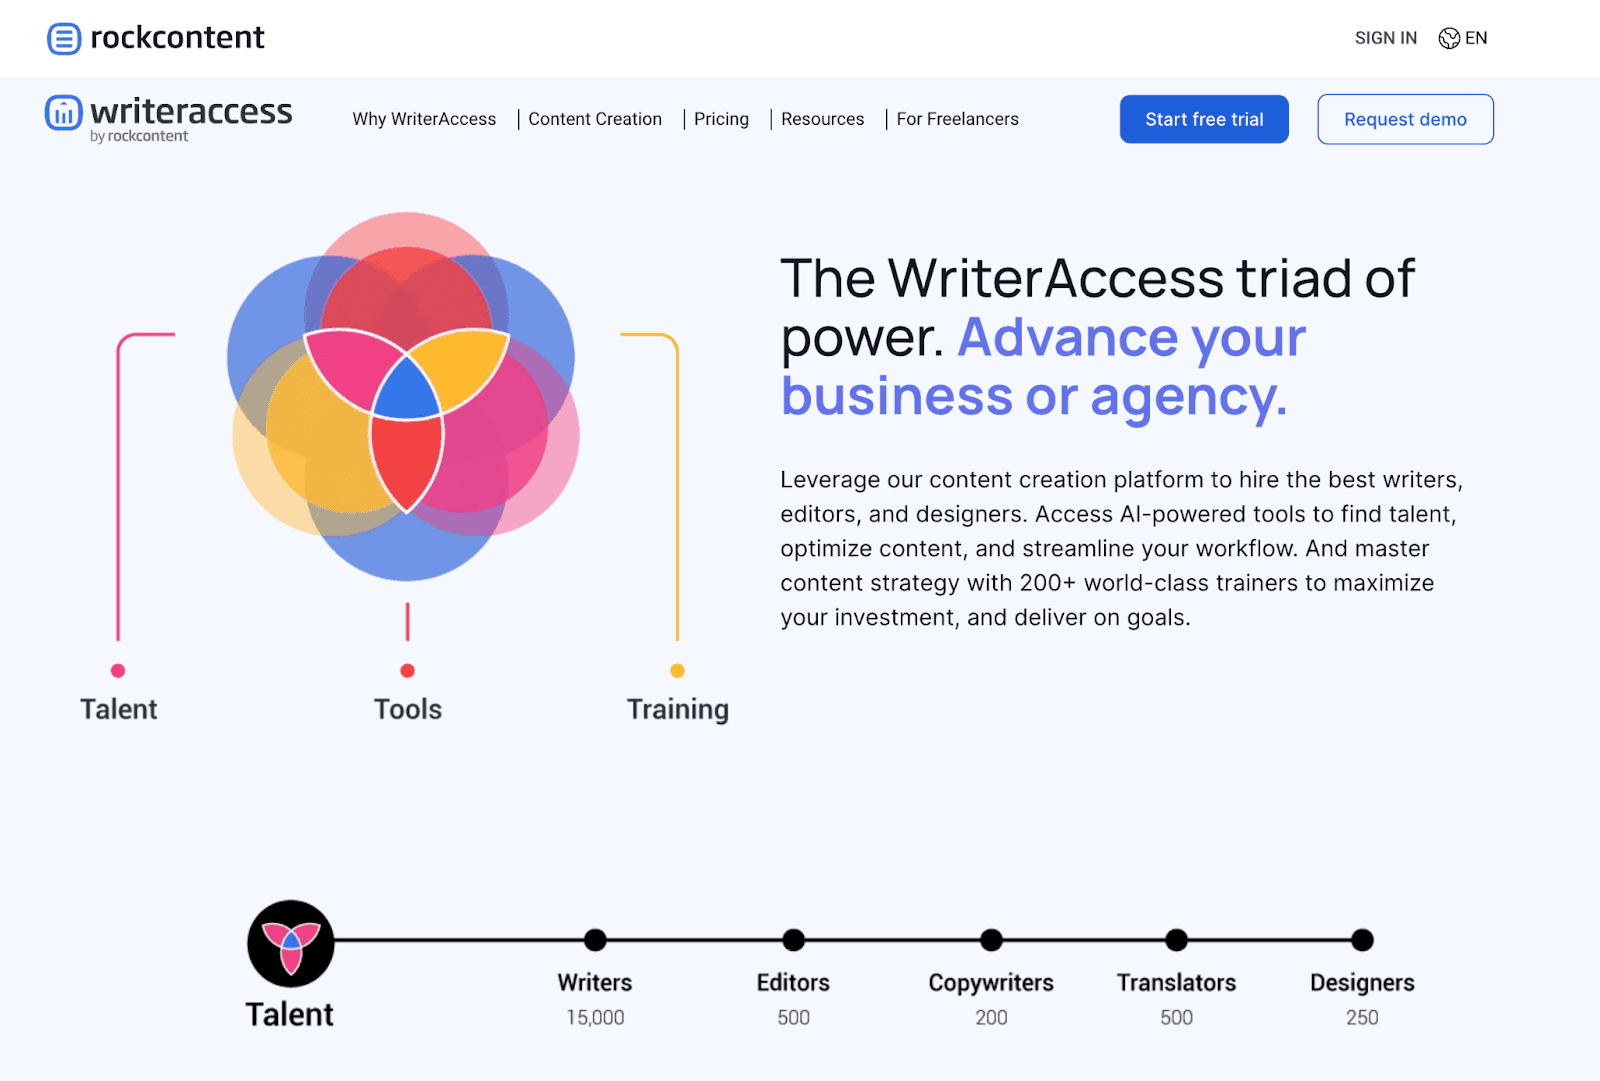 The WriterAccess triad of power. Advance your business or agency